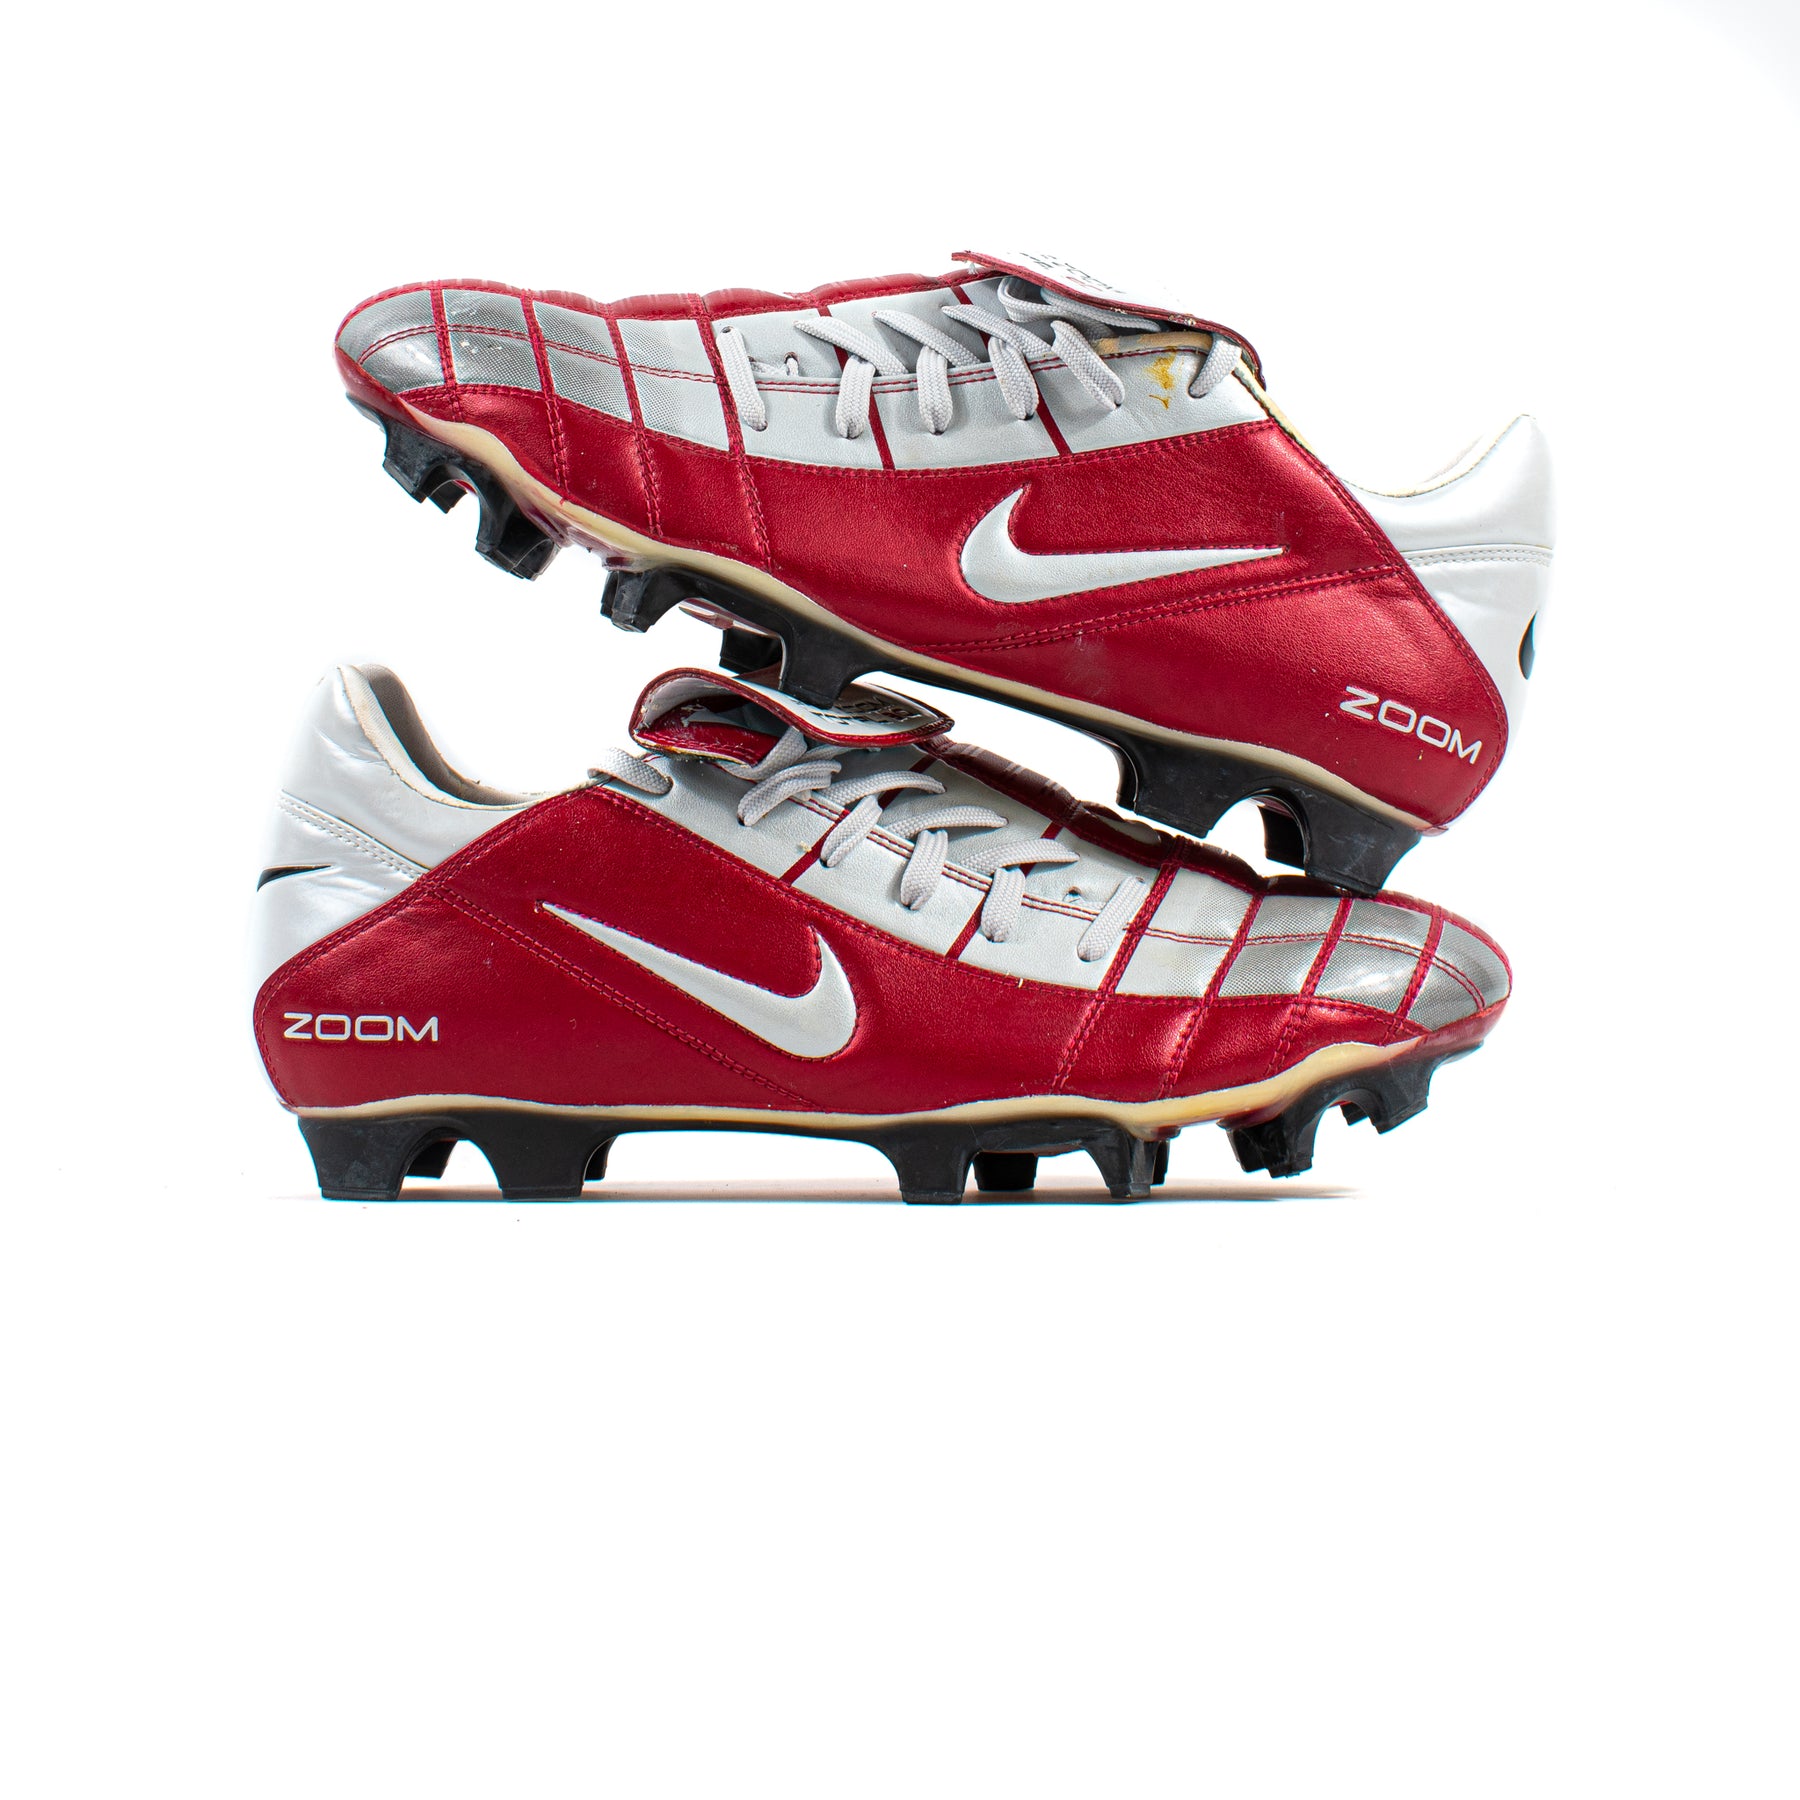 Nike Zoom Total 90 II Red FG – Classic Soccer Cleats